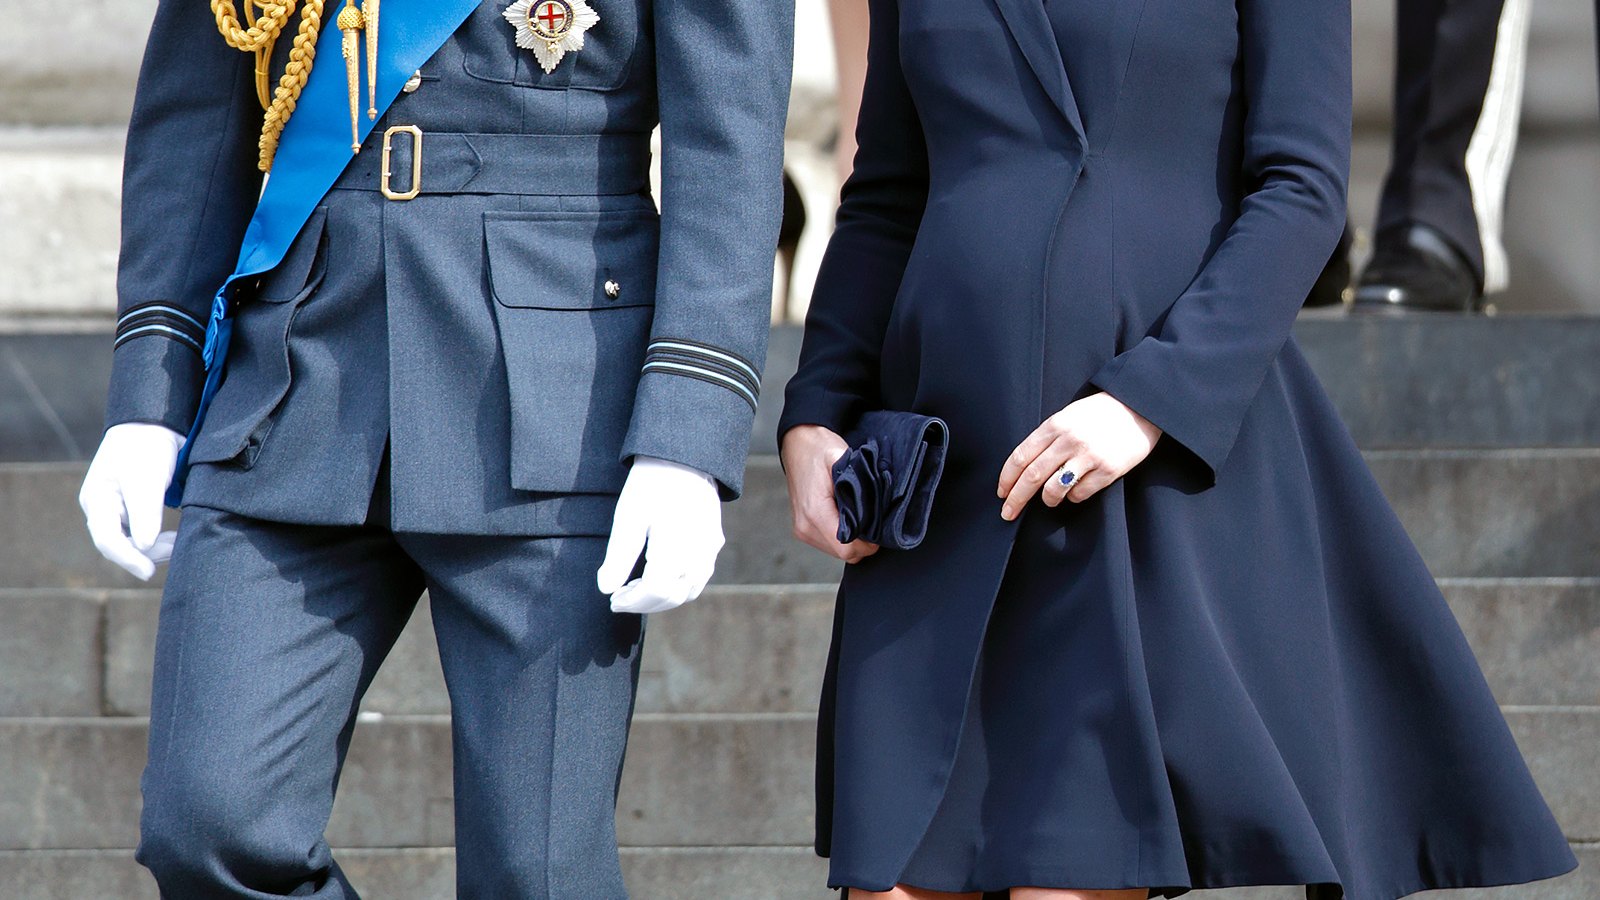 Kate Middleton and Prince William at St Paul's Cathedral on March 13